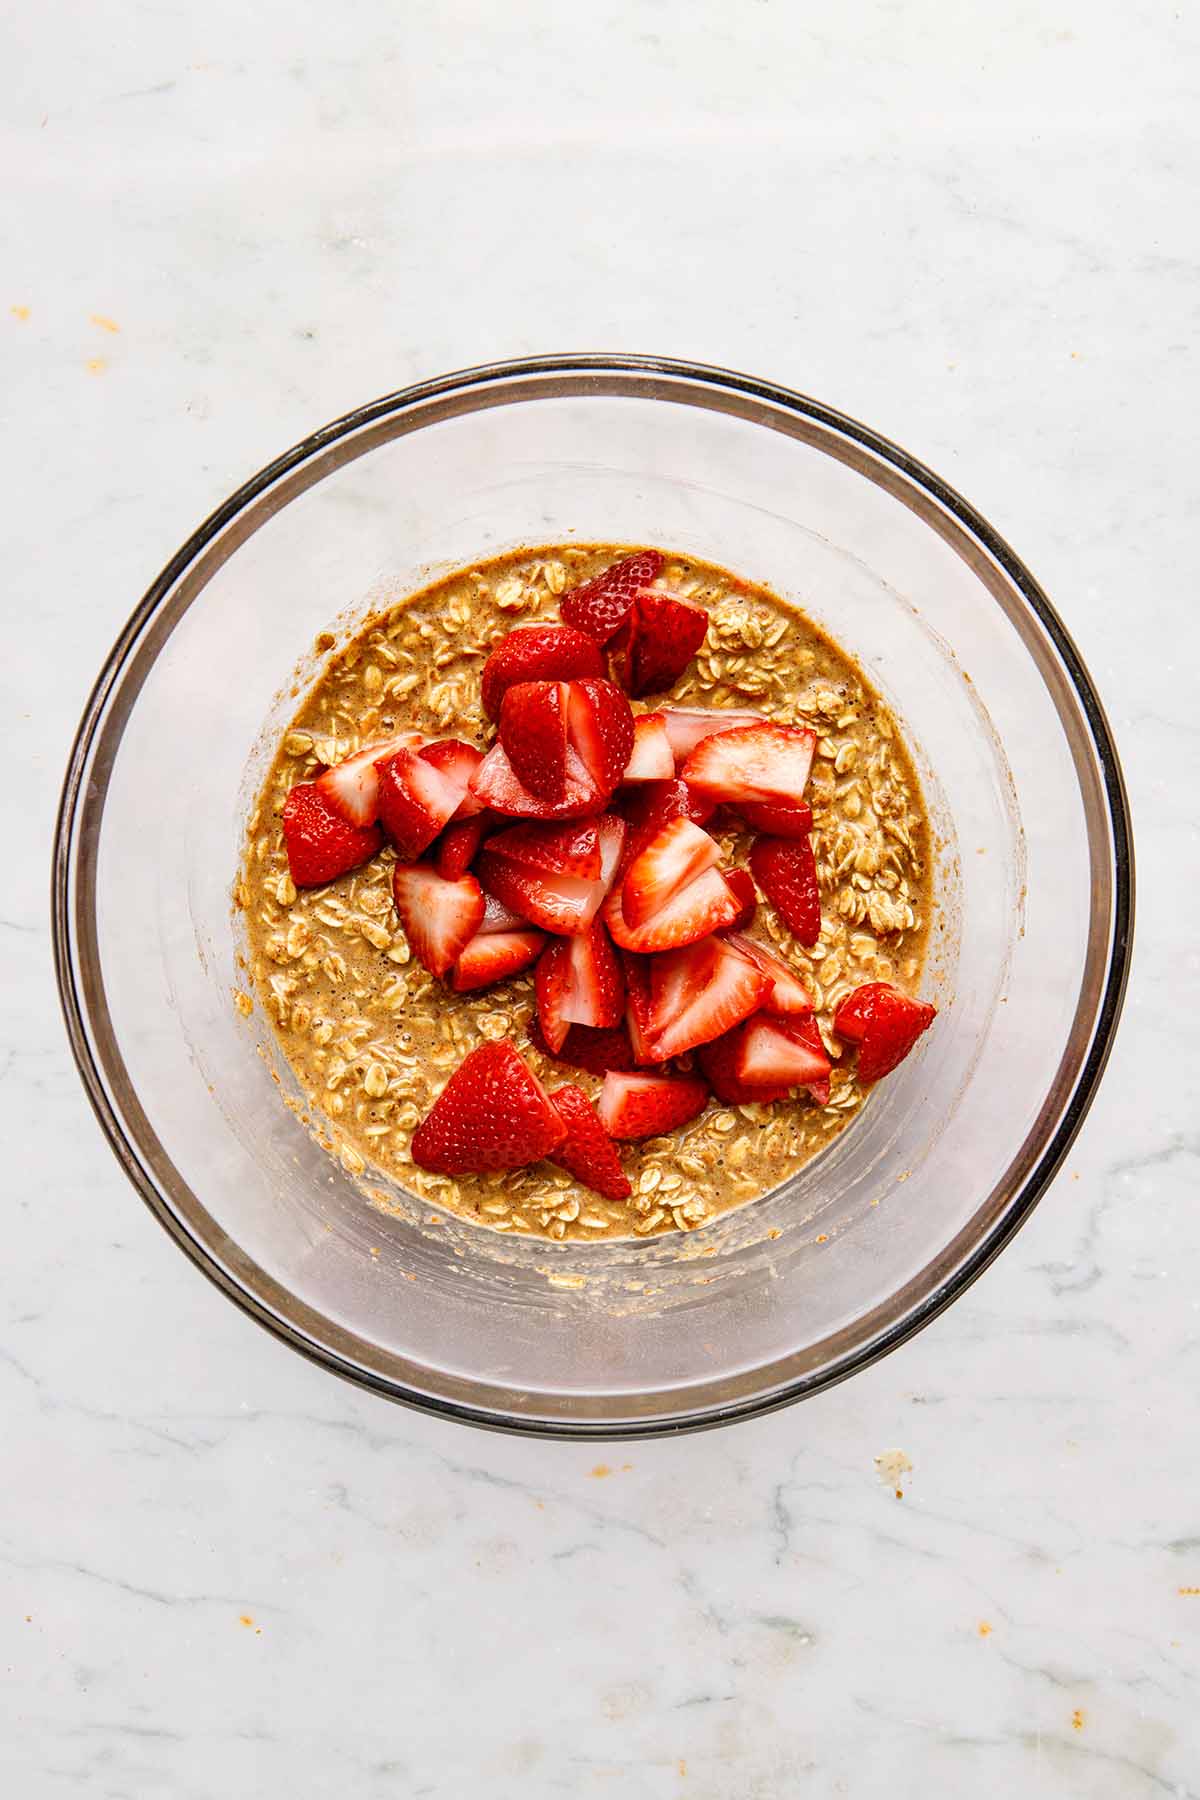 Wet oatmeal in a bowl topped with sliced strawberries.